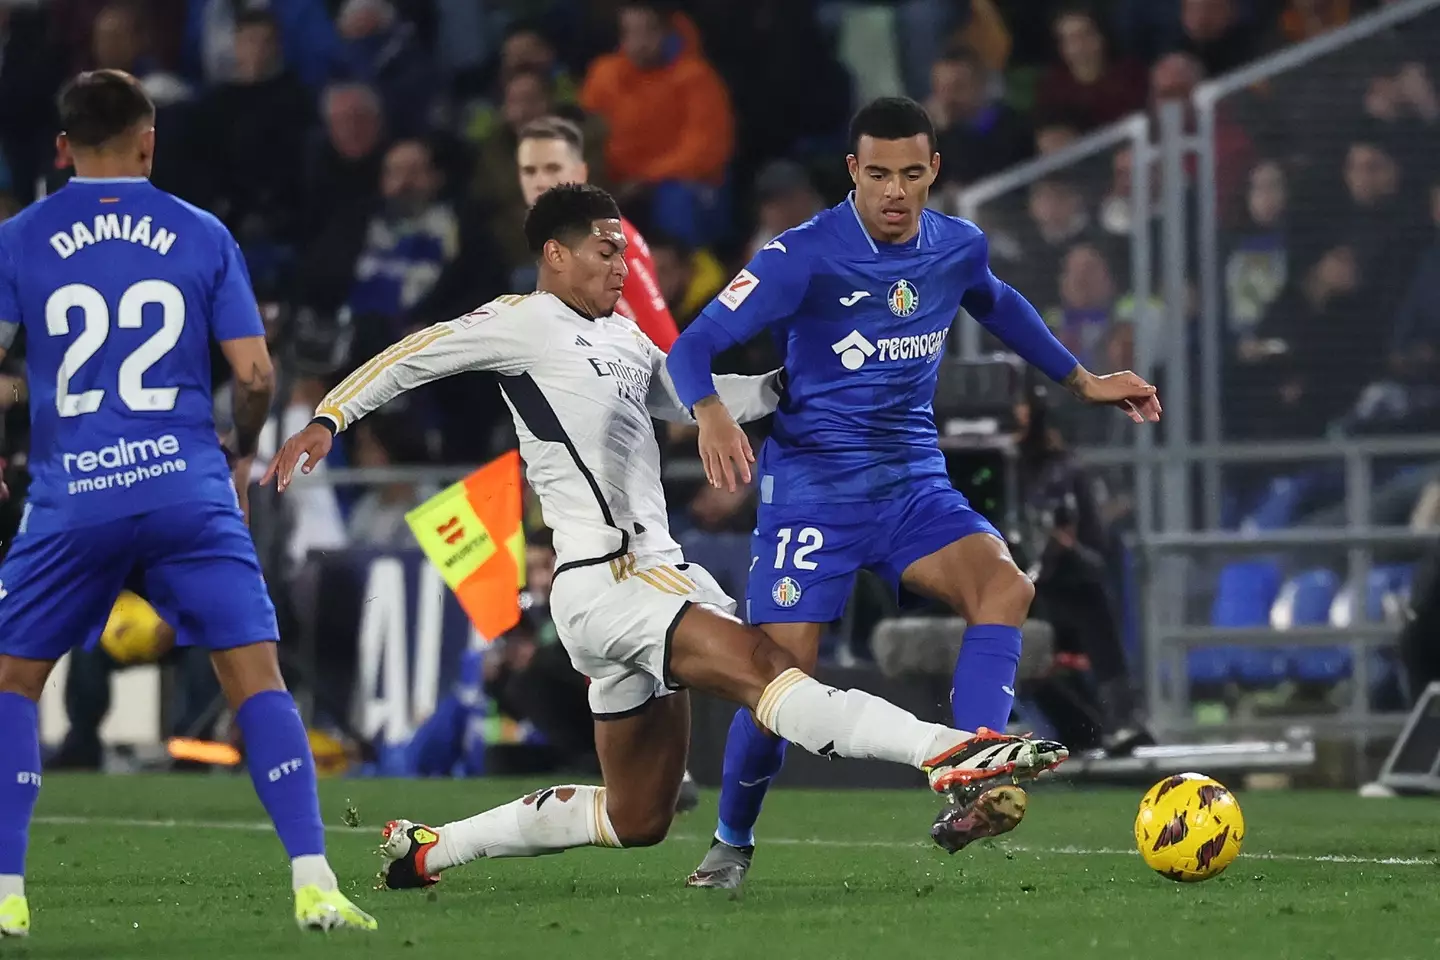 Jude Bellingham and Mason Greenwood during Getafe vs. Real Madrid. Image: Getty